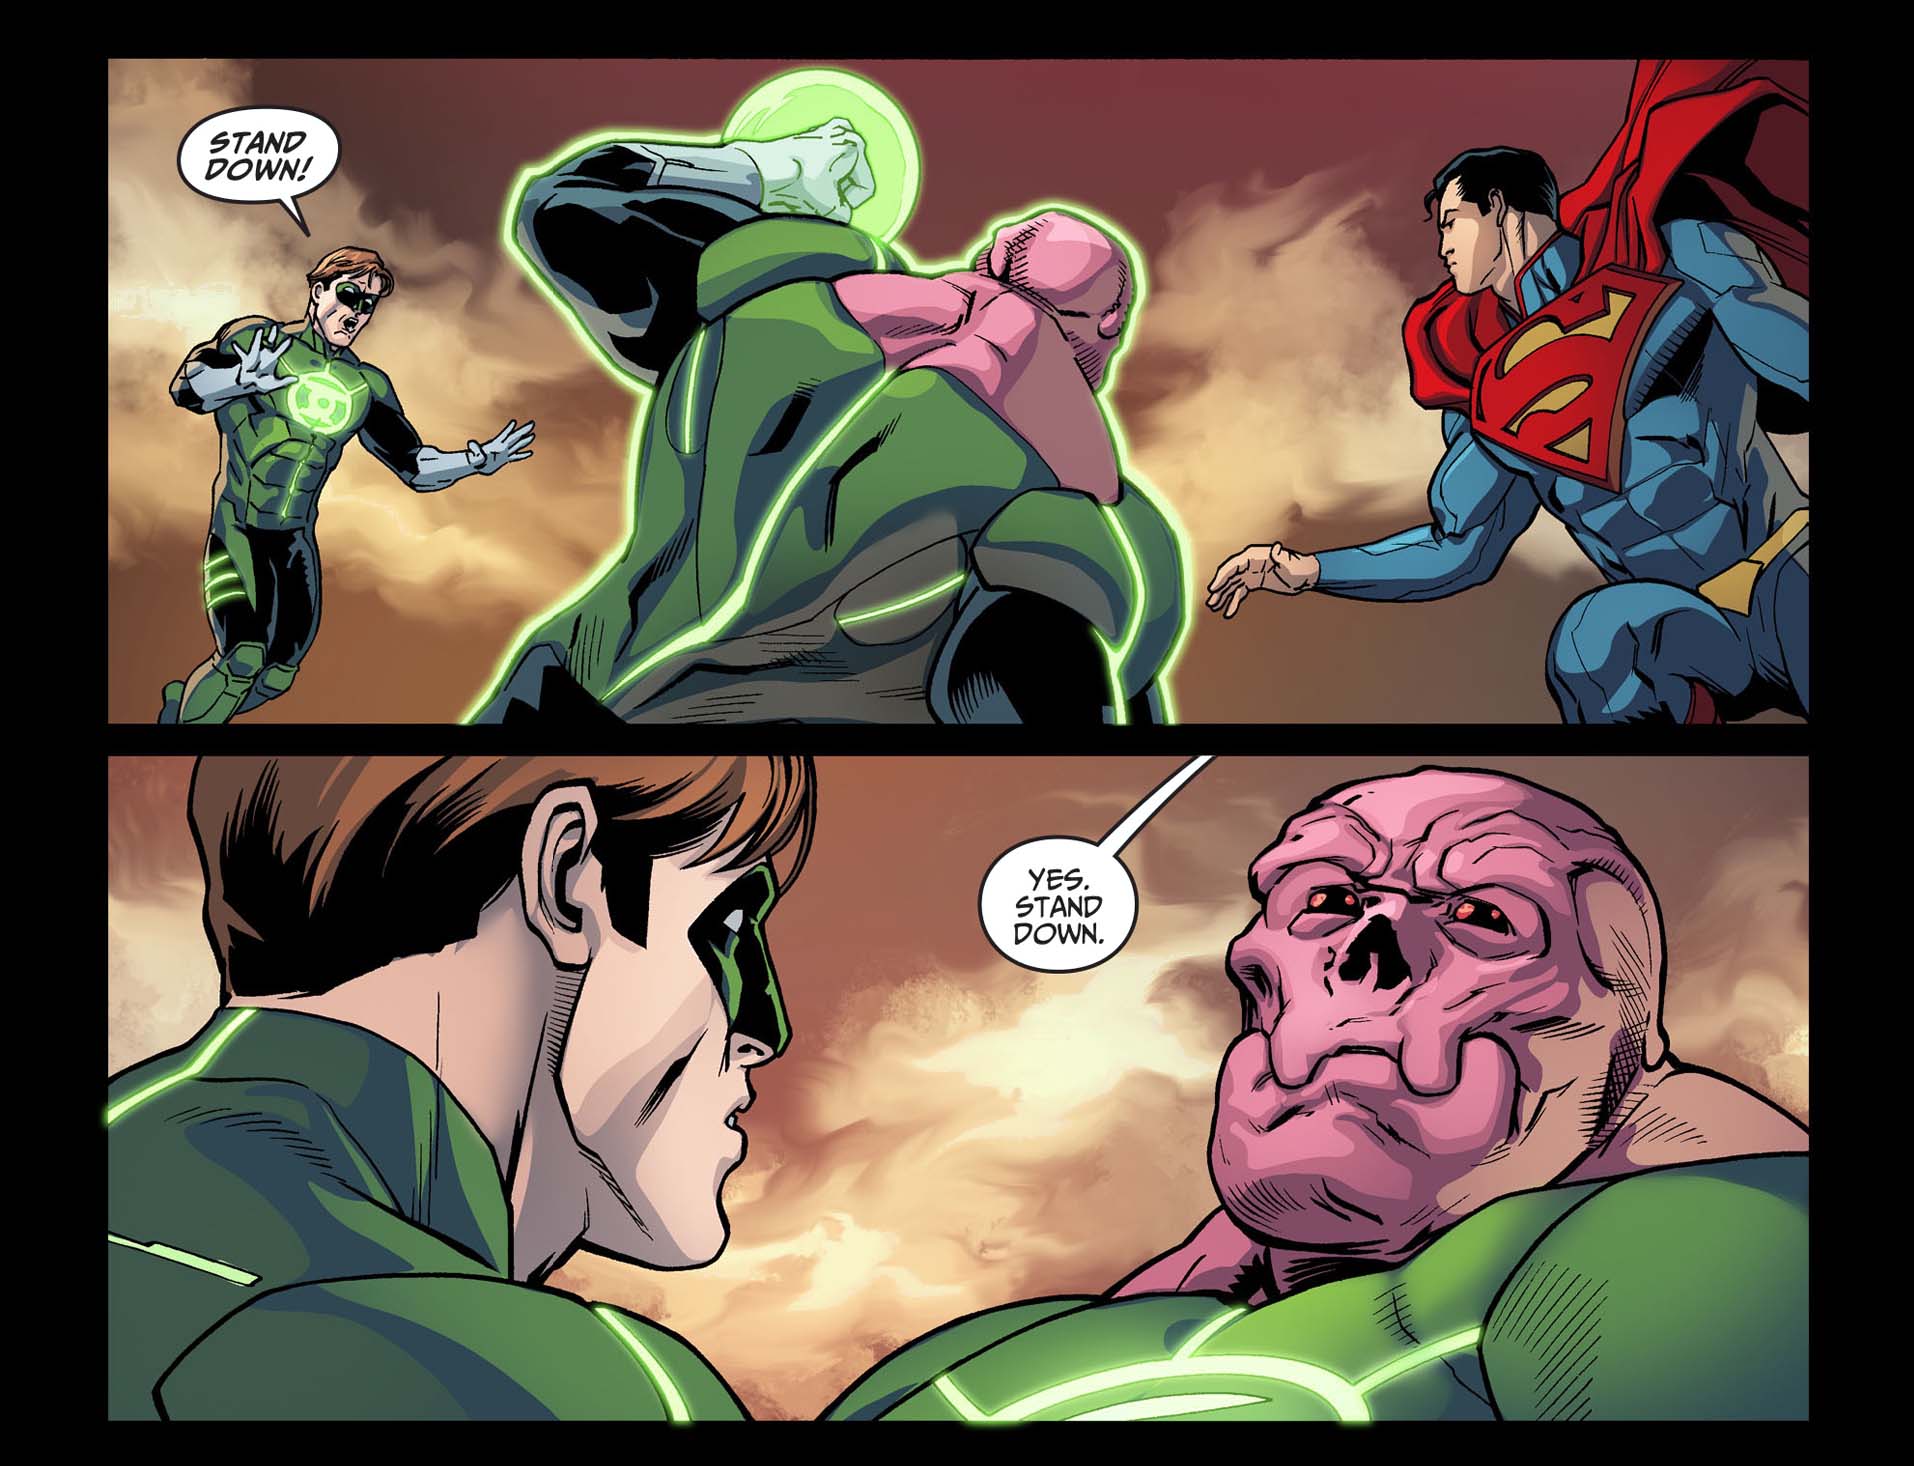 the sinestro corps sides with superman